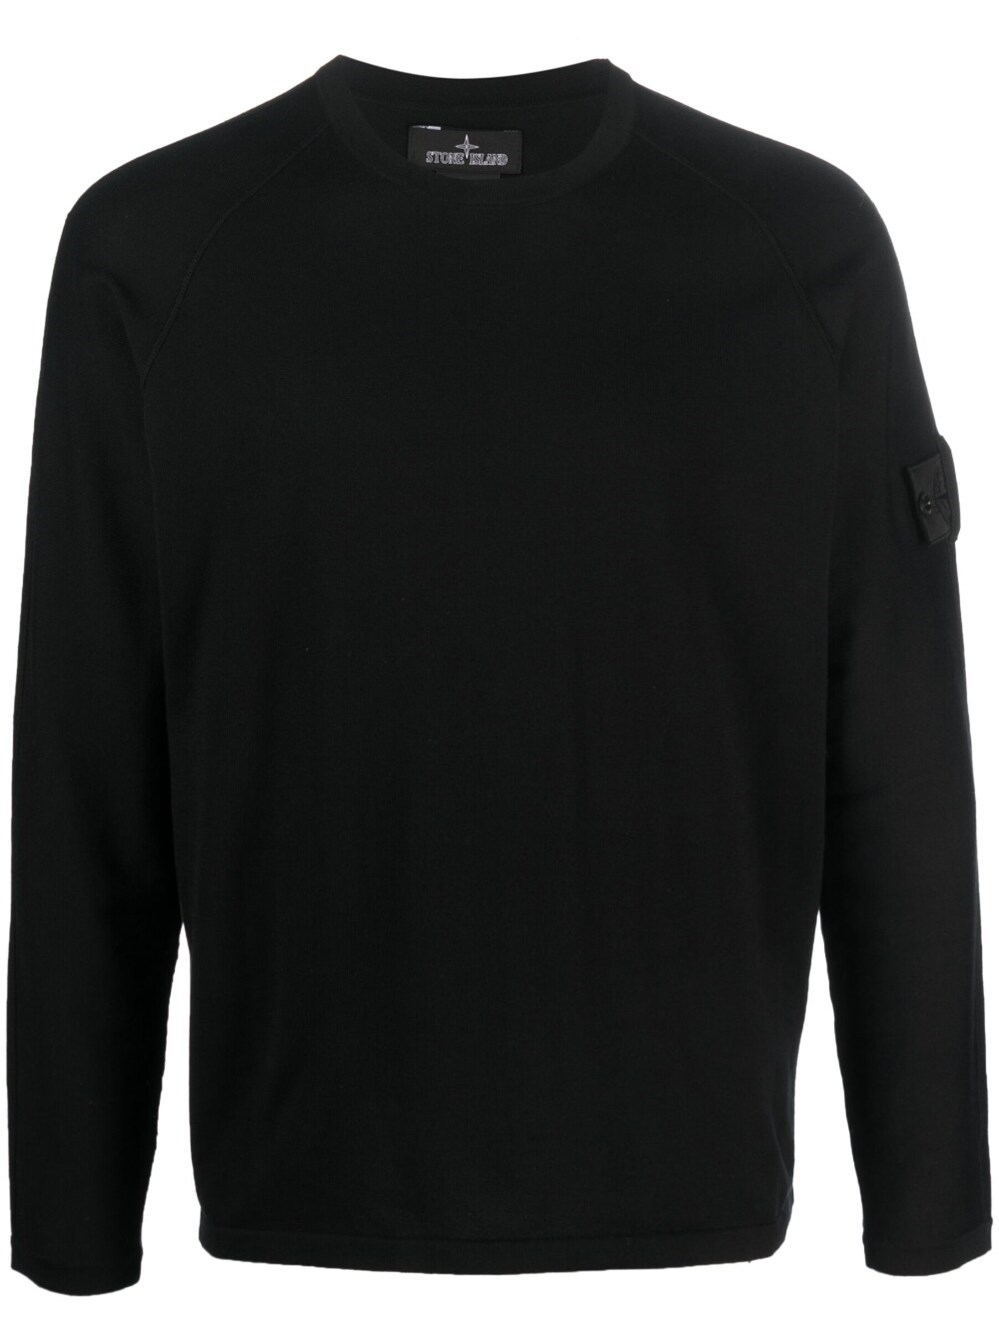 STONE ISLAND SHADOW PROJECT LONG-SLEEVED SWEATSHIRT WITH LOGO PATCH